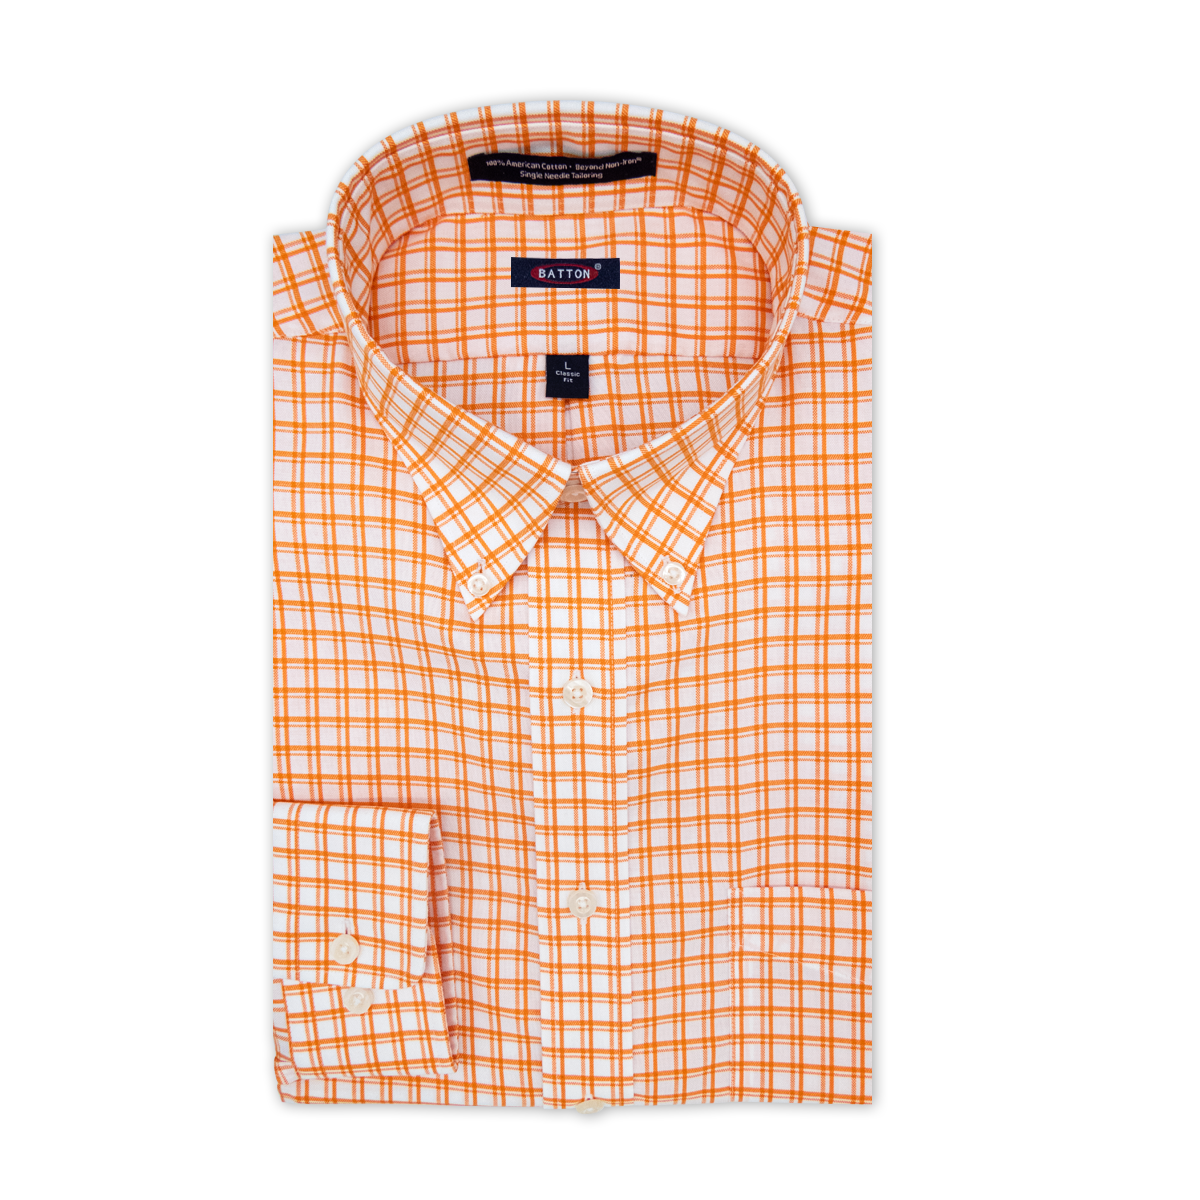 'Tennessee' Orange and White Check Long Sleeve Beyond Non-Iron® Cotton Twill Sport Shirt by Batton